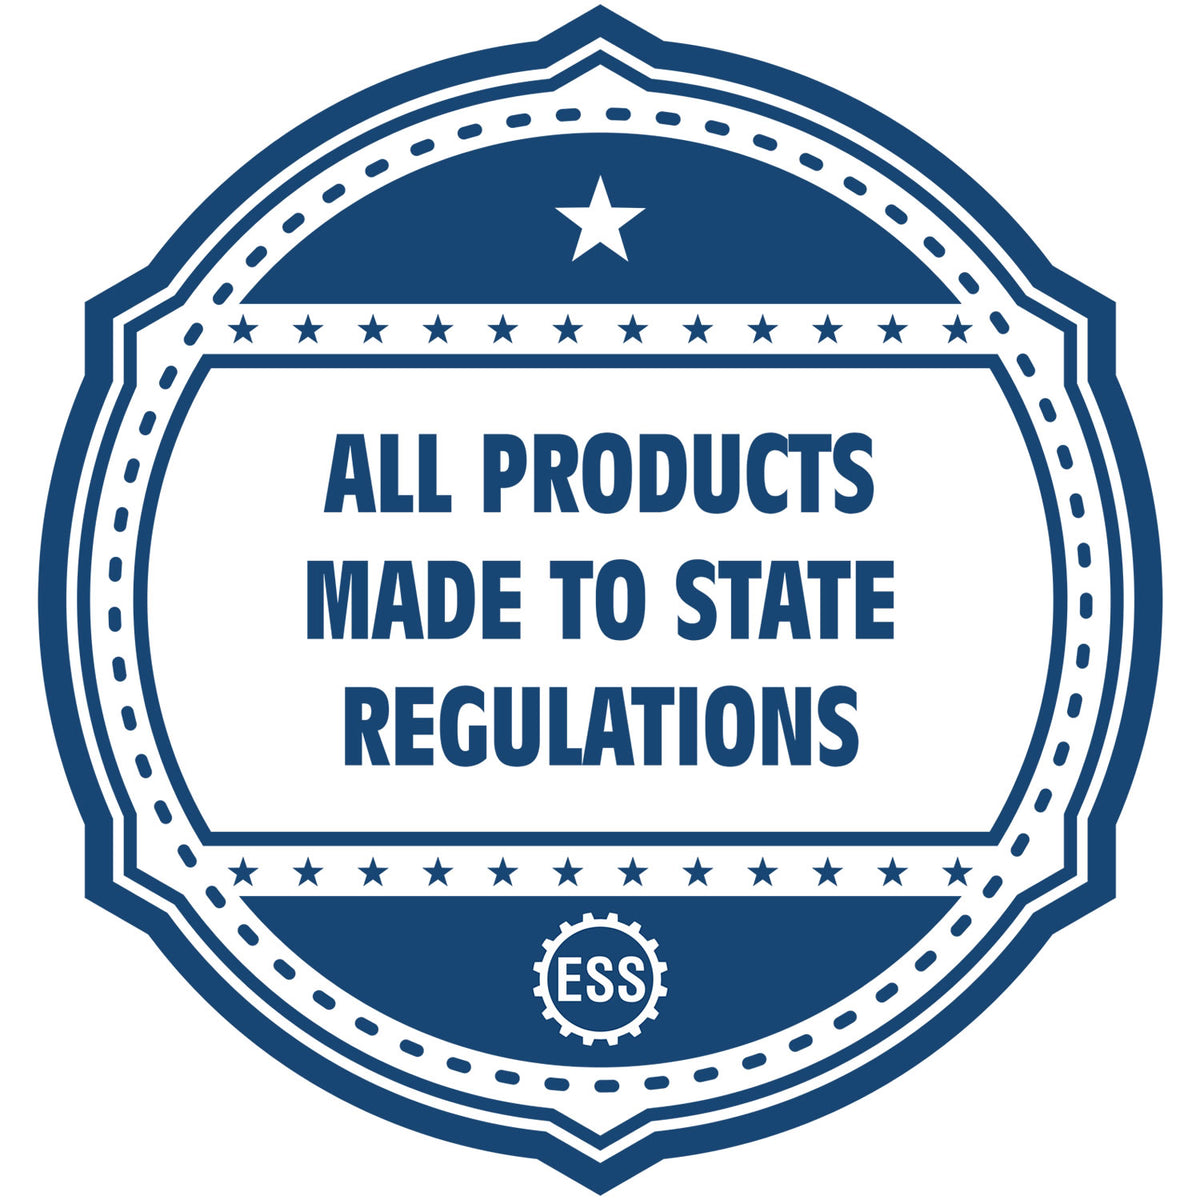 An icon or badge element for the Soft Utah Professional Engineer Seal showing that this product is made in compliance with state regulations.